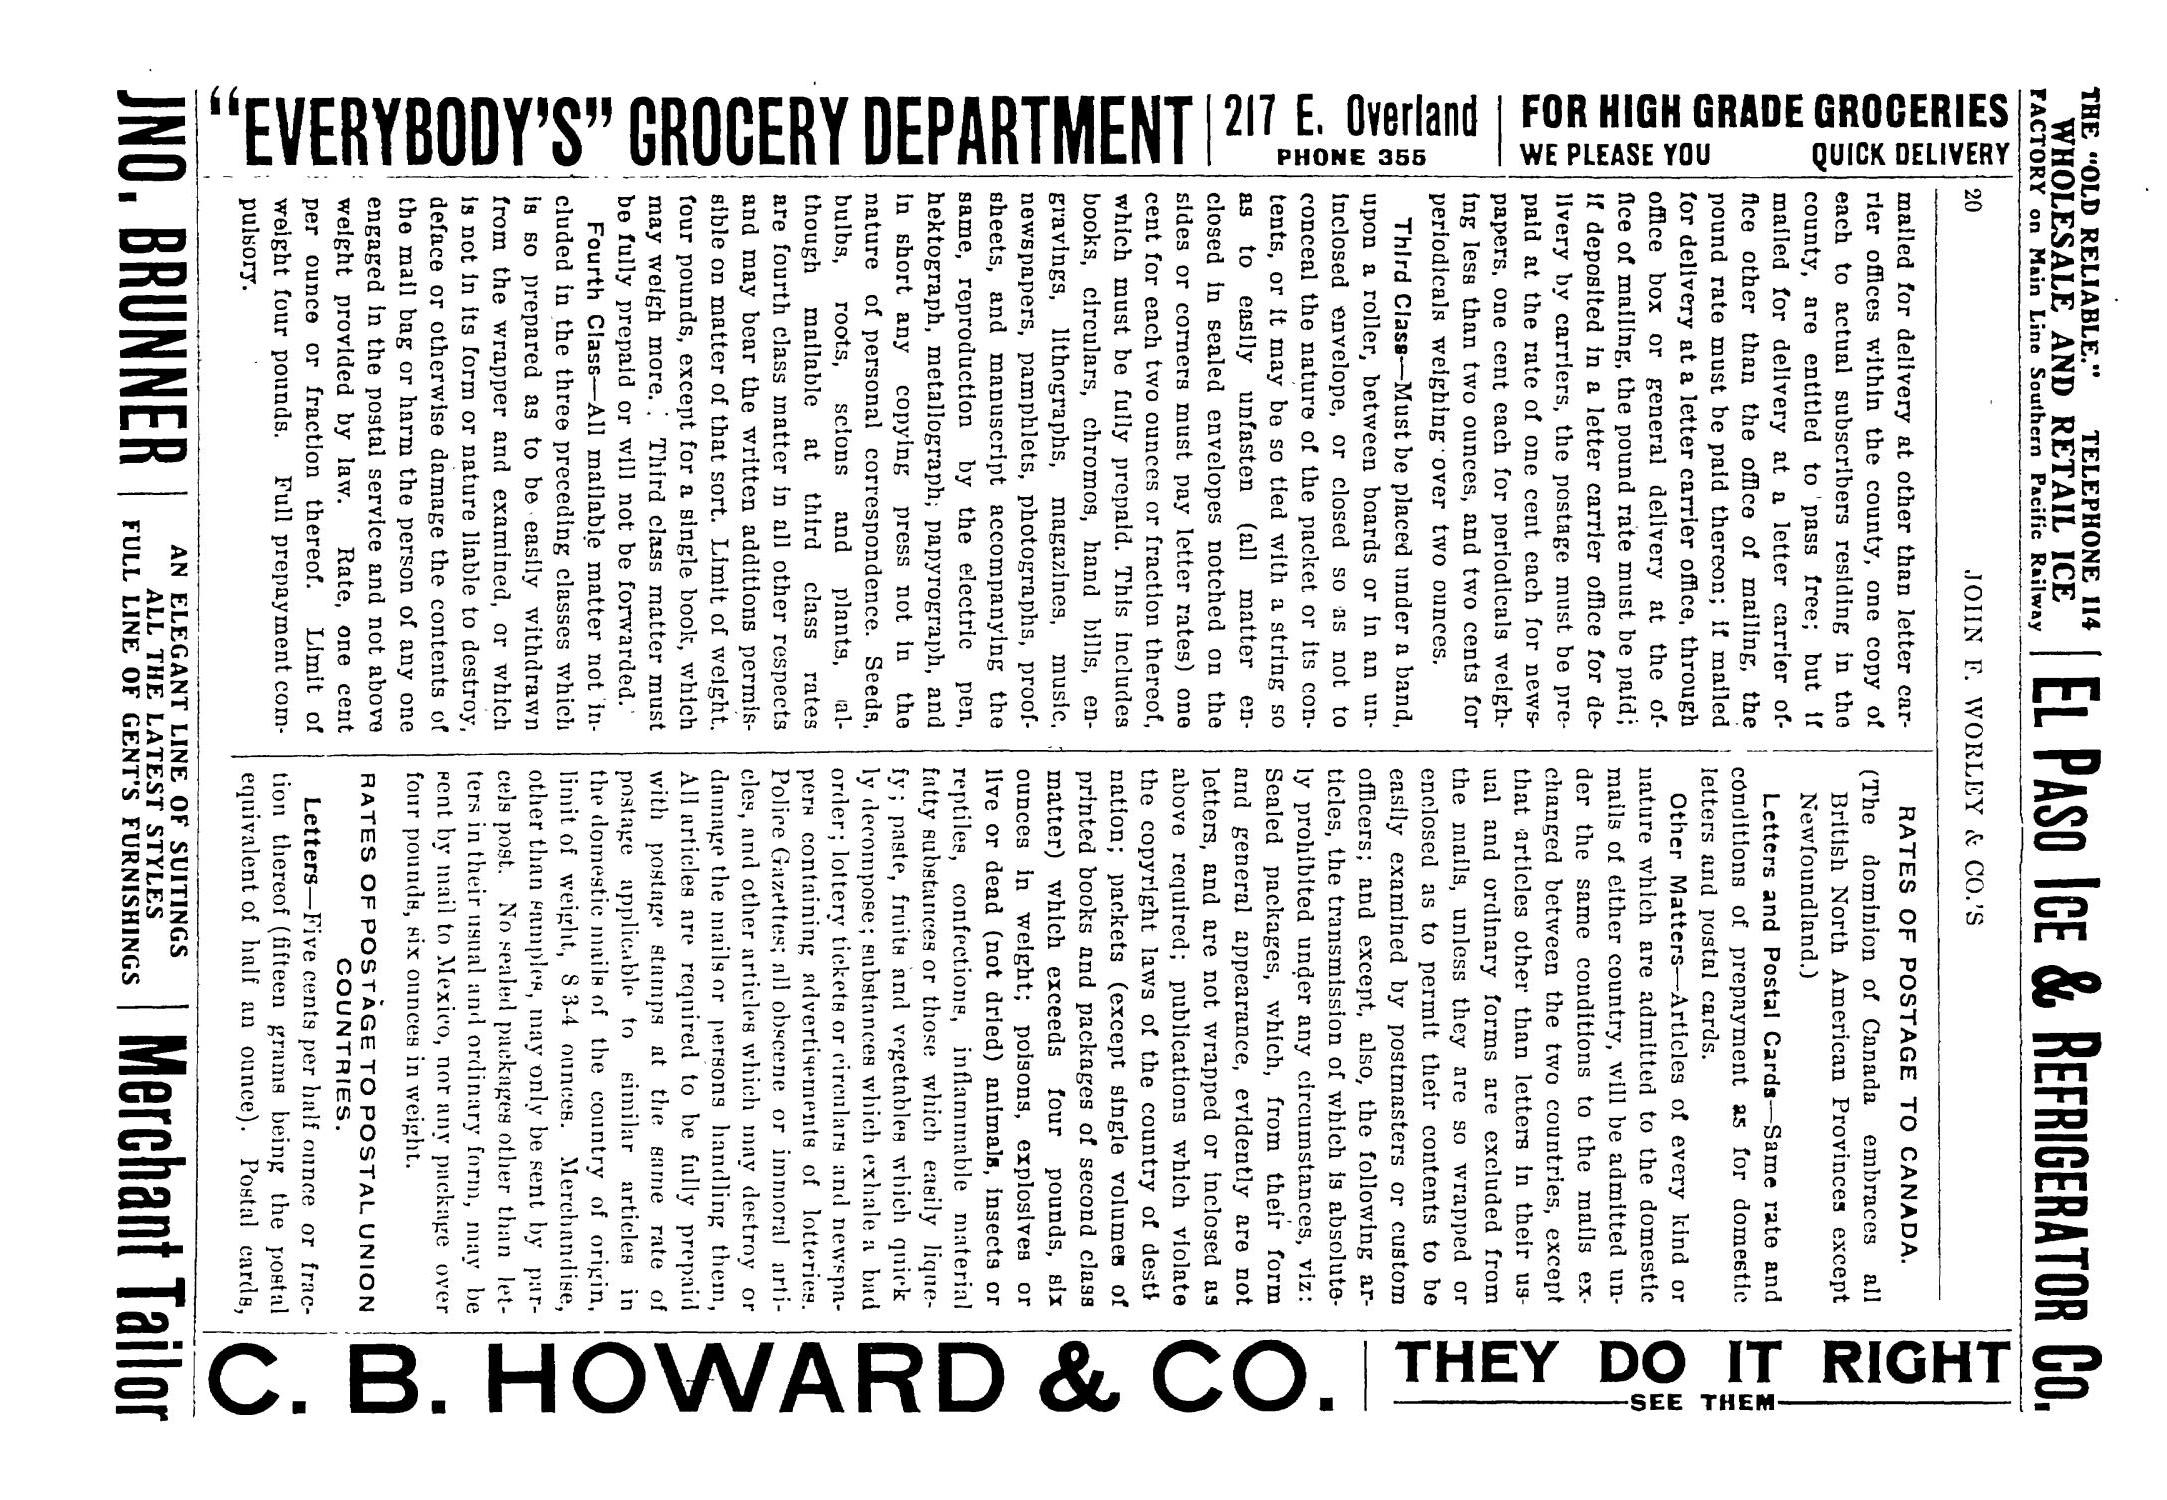 John F. Worley & Co.'s El Paso Directory for 1906
                                                
                                                    20
                                                